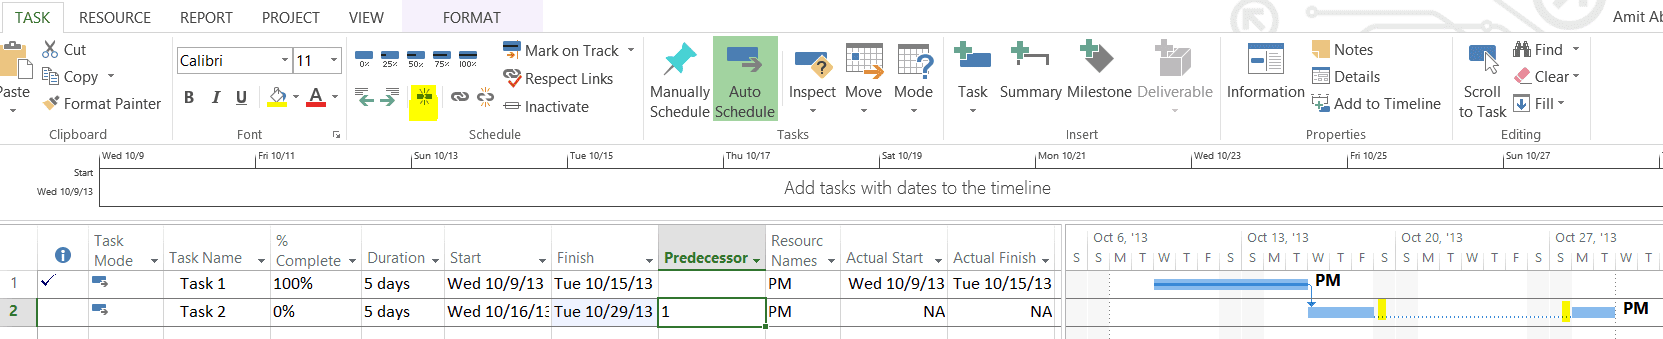 Updating Project Schedule